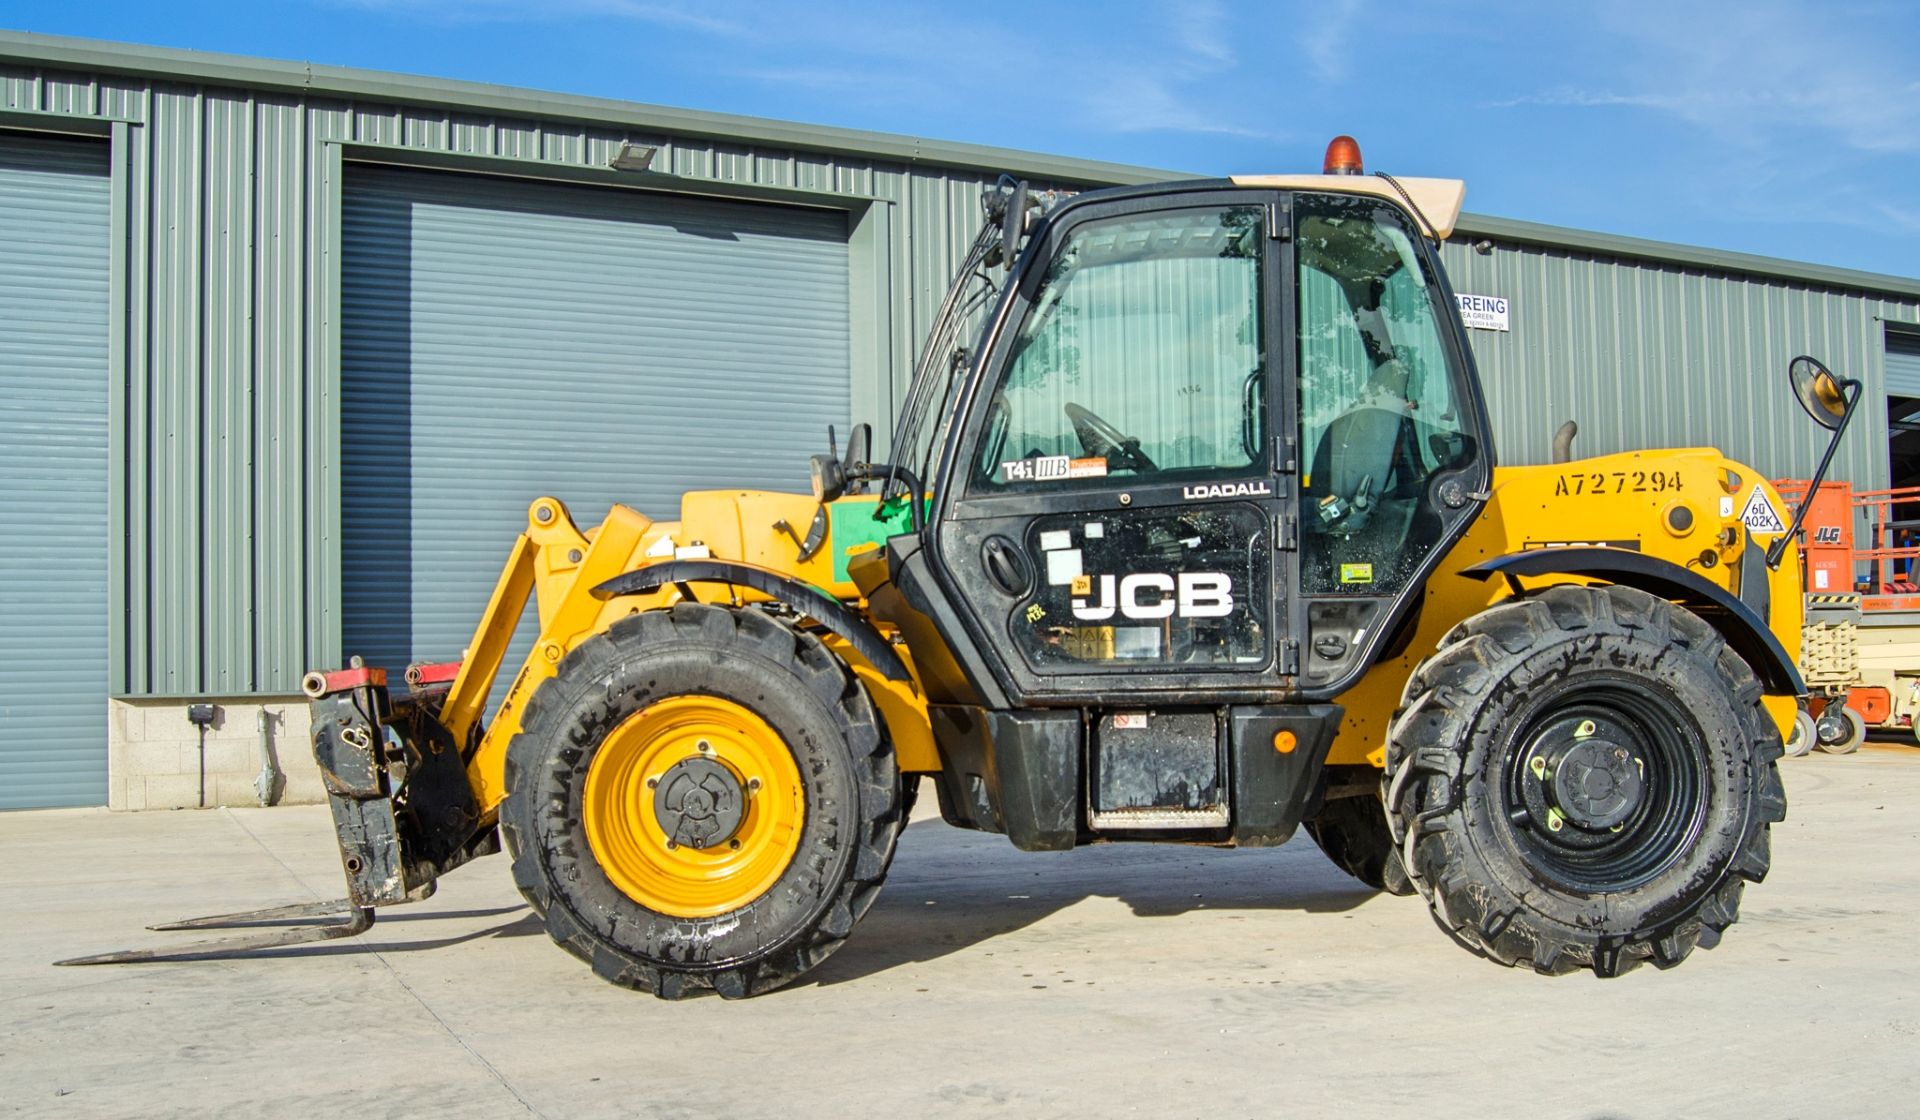 JCB 531-70 7 metre telescopic handler Year: 2016 S/N: 2461247 Recorded Hours: 2470 A727294 - Image 7 of 23